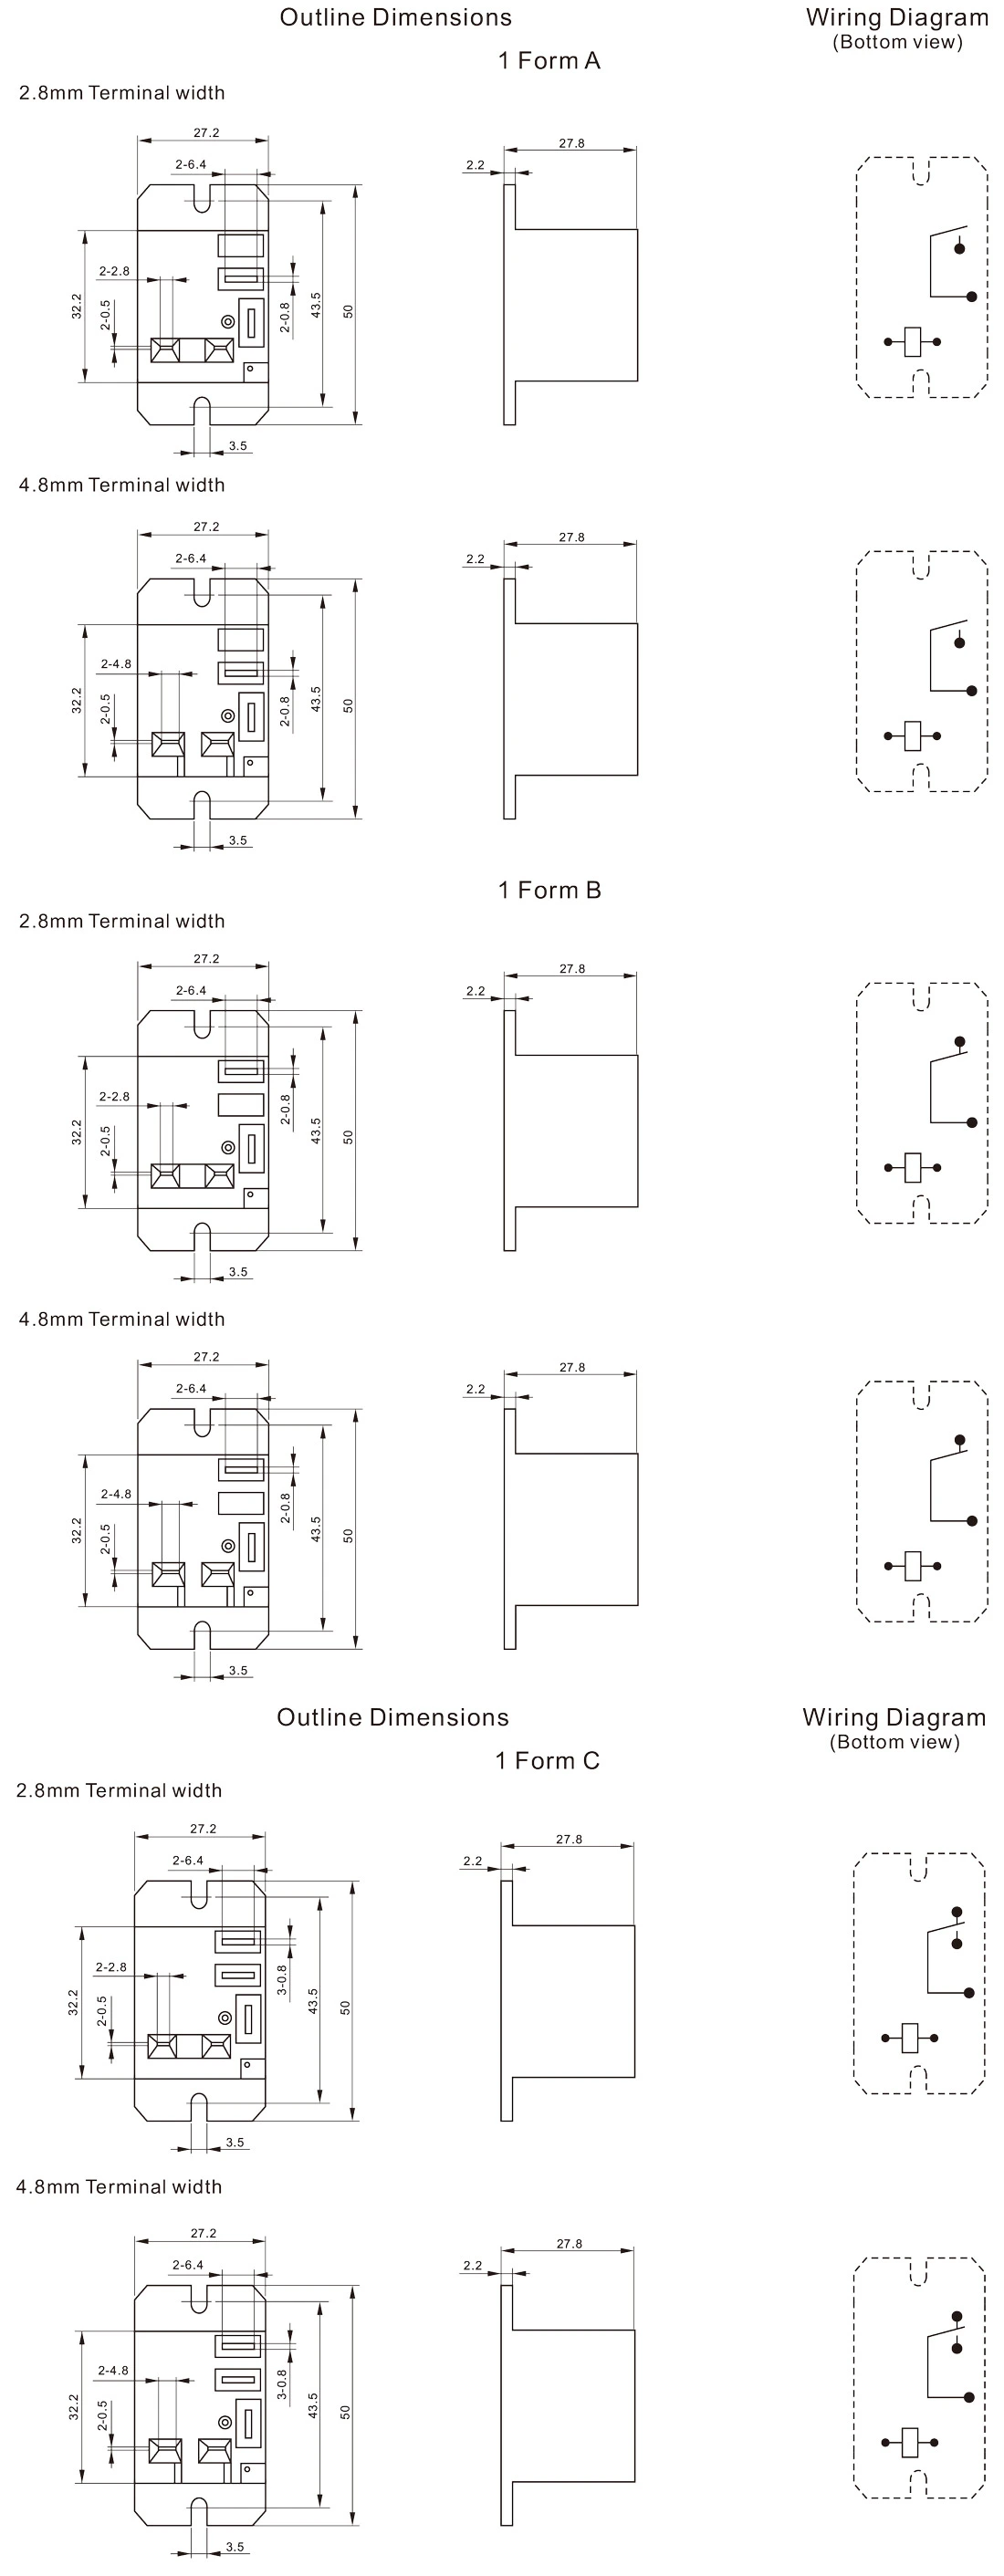 Dimensions of Miniature High Power Relay JT105F-4